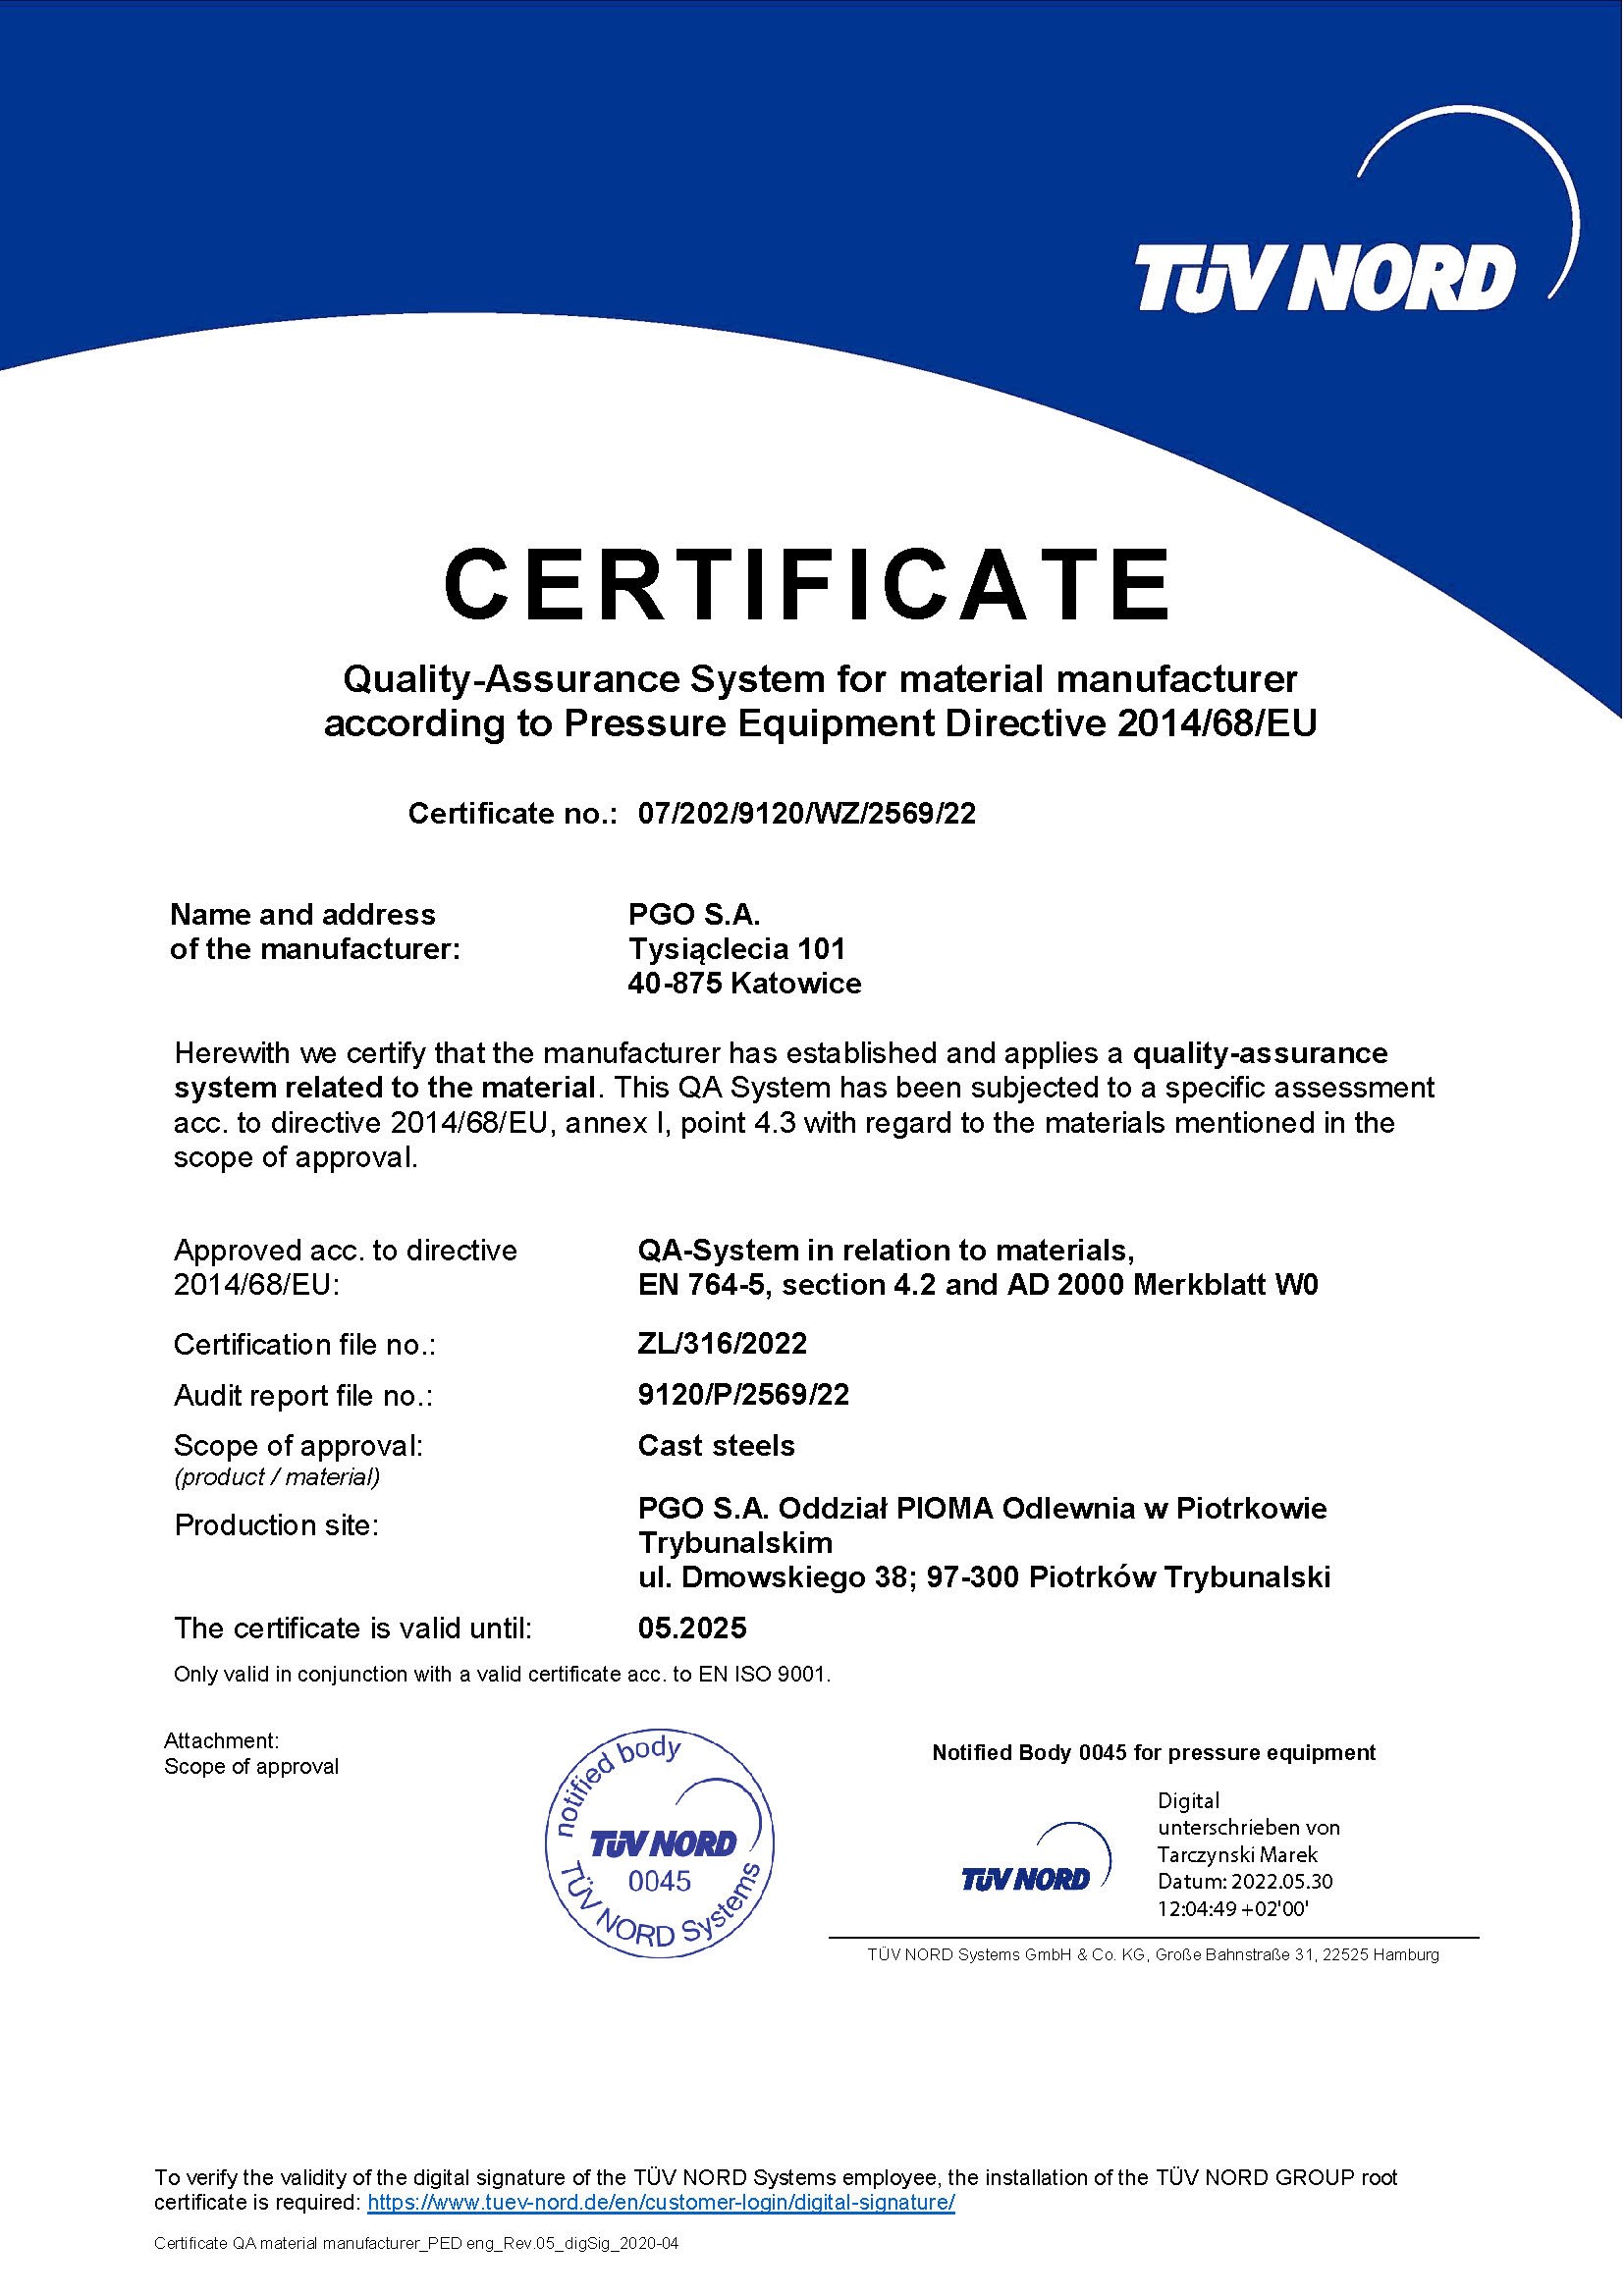 Certificate Quality-Assurance System for material manufacturer according to Pressure Equipment Directive 2014